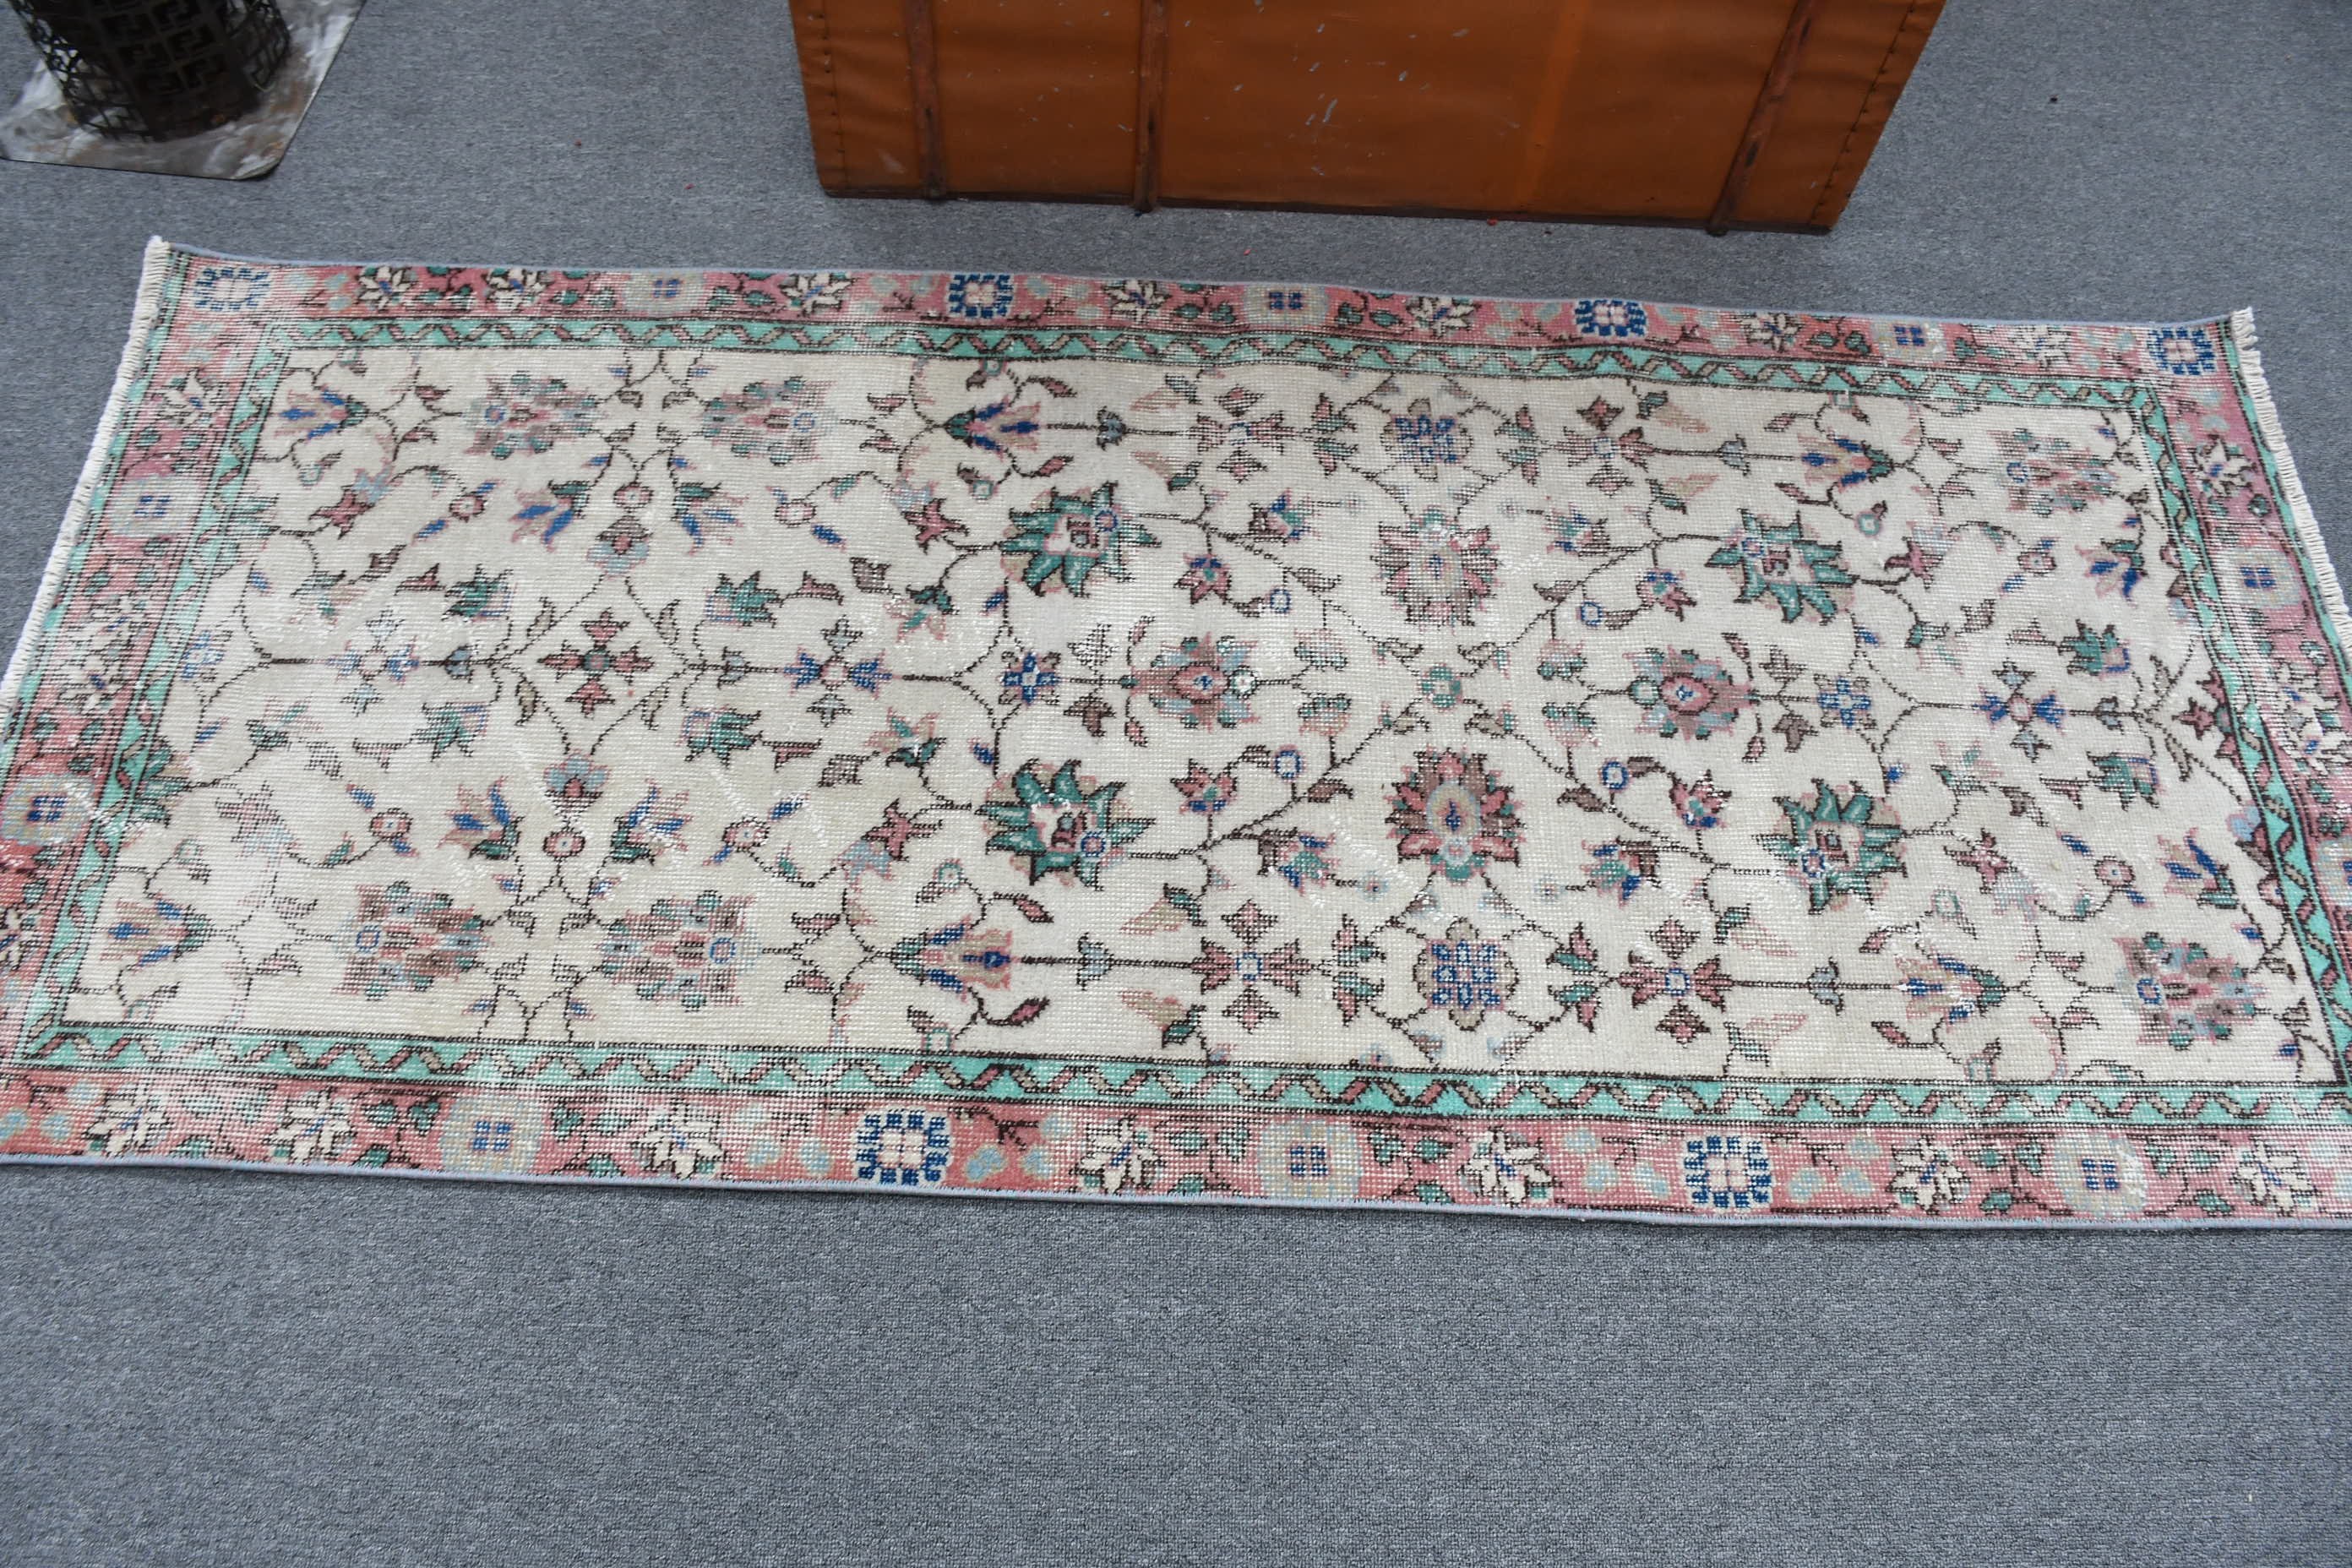 Vintage Rugs, Home Decor Rug, Rugs for Kitchen, Entry Rug, Kitchen Rugs, Wool Rugs, Distressed Rug, 2.8x6.4 ft Accent Rugs, Turkish Rug